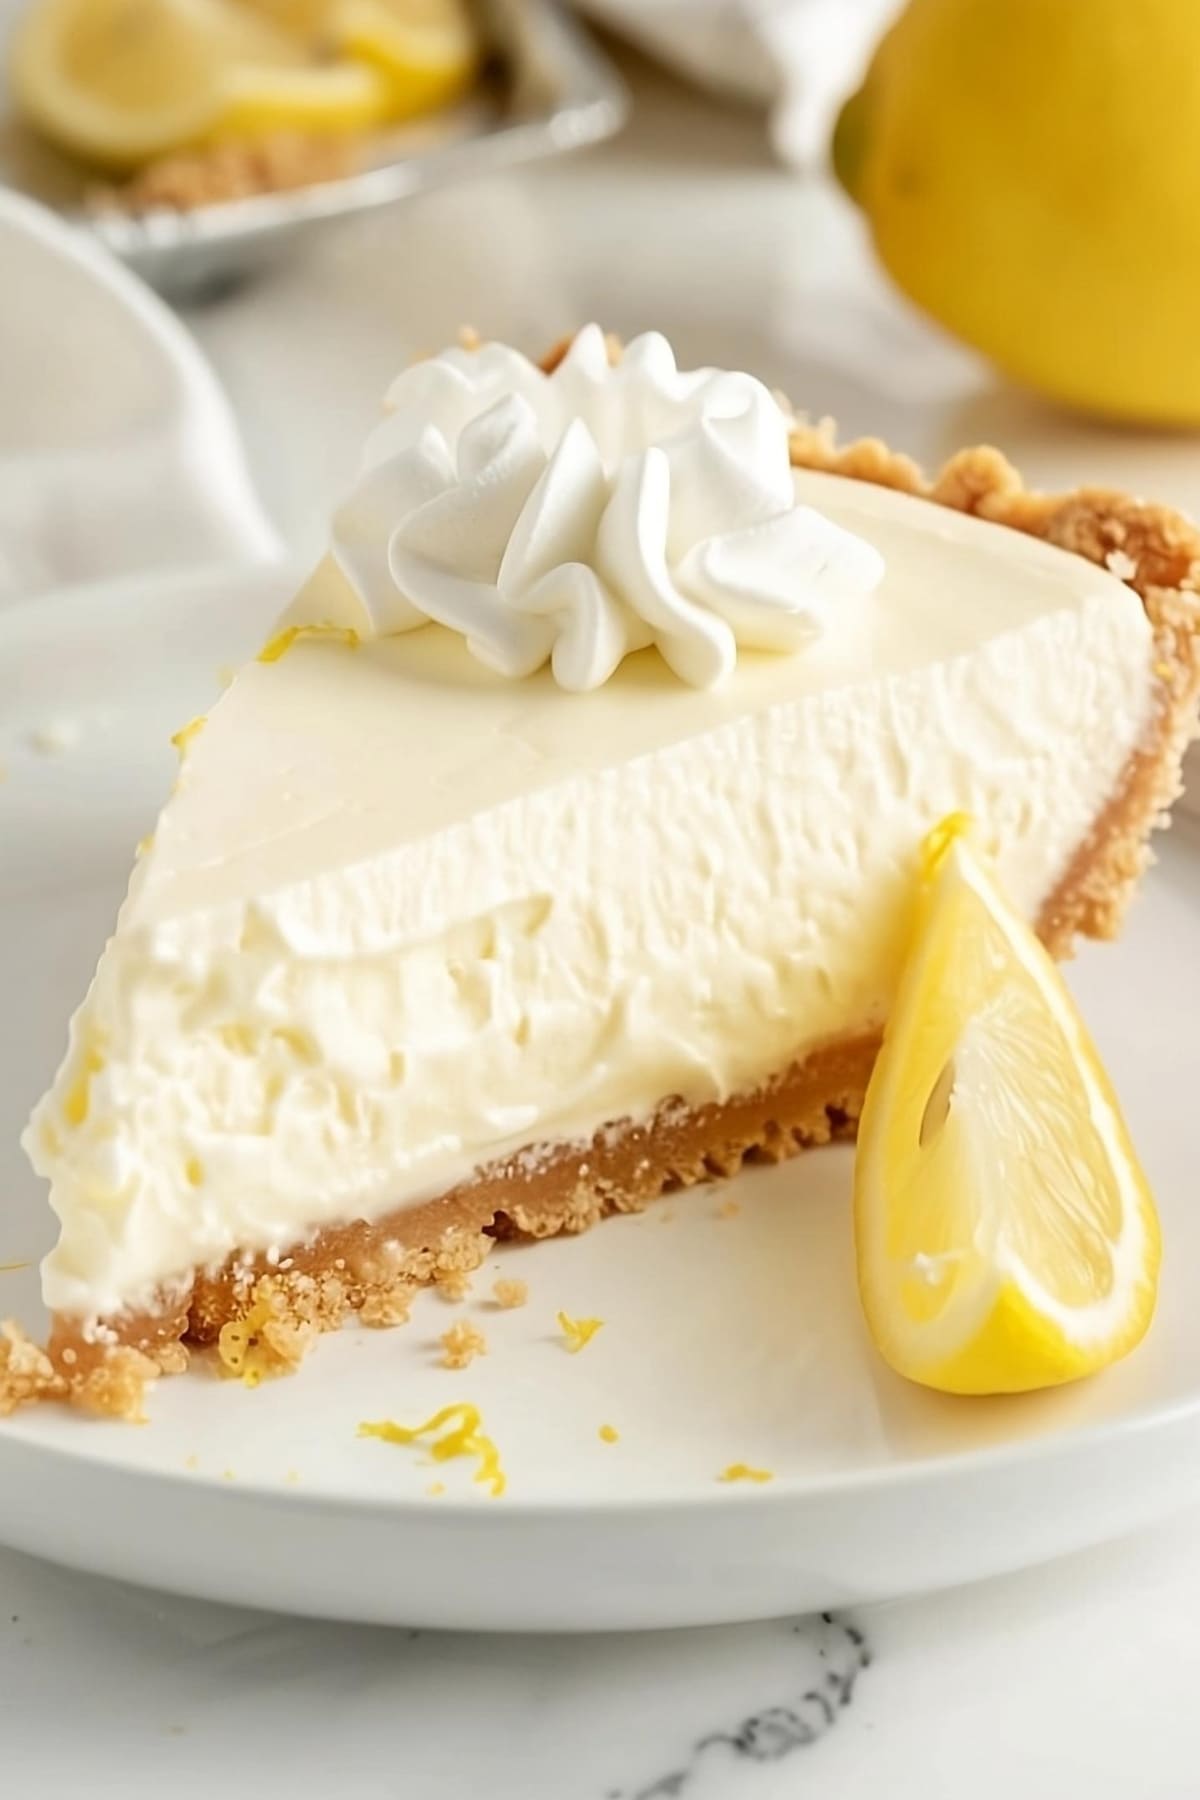 Cream Cheese Lemonade Pie garnished with dollop of whipped cream and lemon wedge slice on the side served on a white plate.